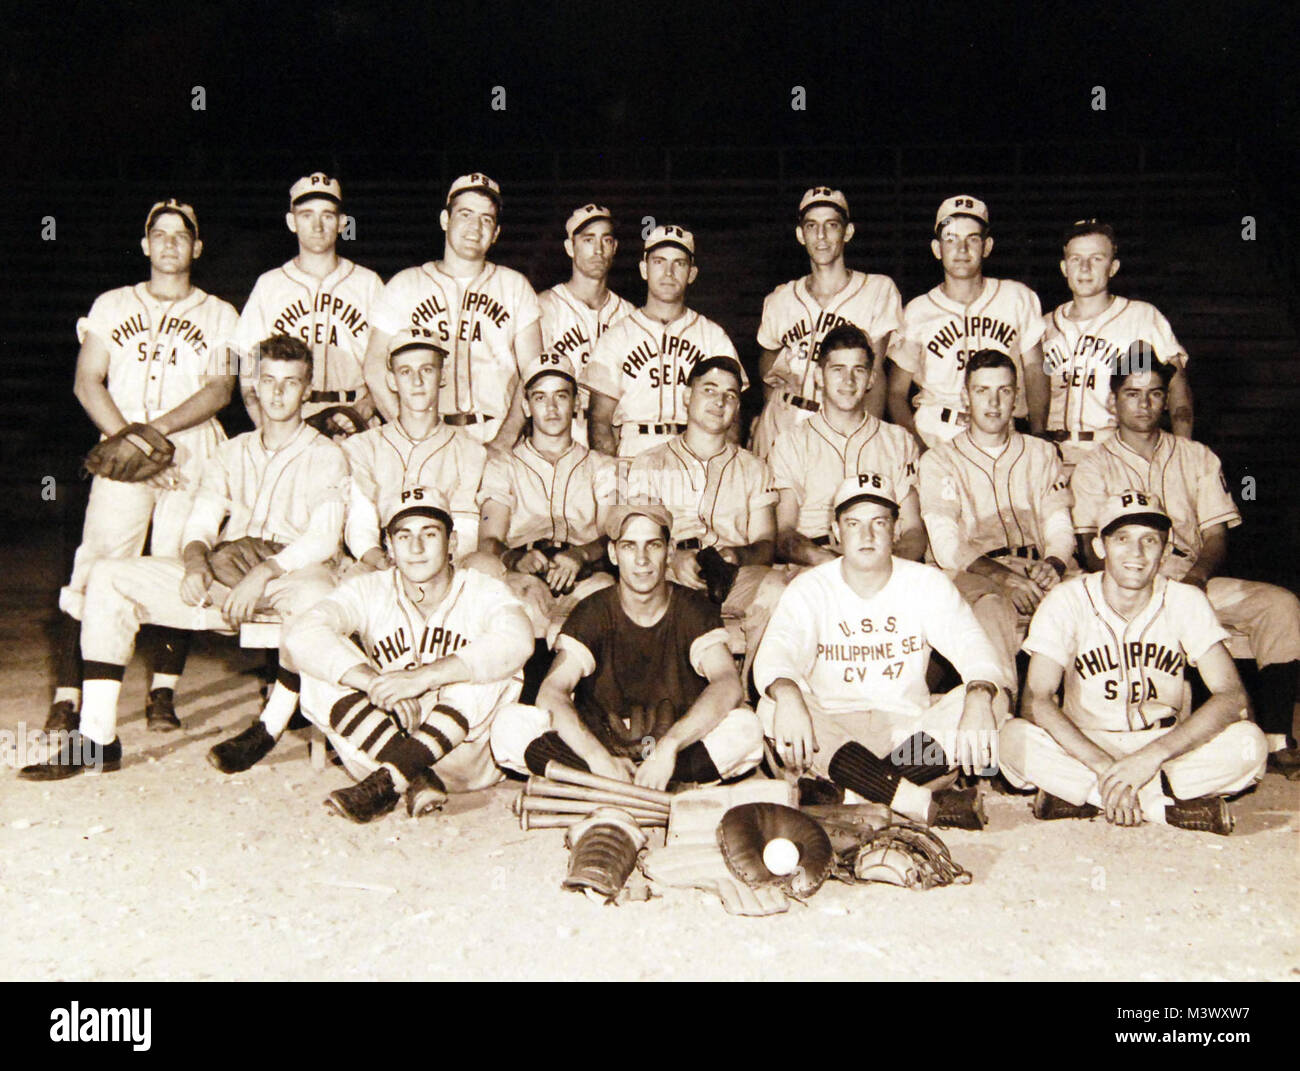 80-G-409016:  USS Philippine Sea (CVA-47), Baseball Team, at Guantanamo Bay Cuba.  Left to right (Top Row):  A. Griffin; W. Closs; W. Nott; H. Booher; J. Baird; F. Fogelman; D. Winter; O. Fecteau.  (Center Row):  G. Bewcastle; W. Gerbrosky; A. Capo; J. Denk; P. Uher; R. Sund; L. Herrara. (Bottom Row): F. Magliochette; R. Bailey; F. Allen; and A. Aycock.  Photographed 1949.  Official U.S Navy   Photograph, now in the collections of the National Archives.  (2017/12/13). 80-G-409016 25166687138 o Stock Photo